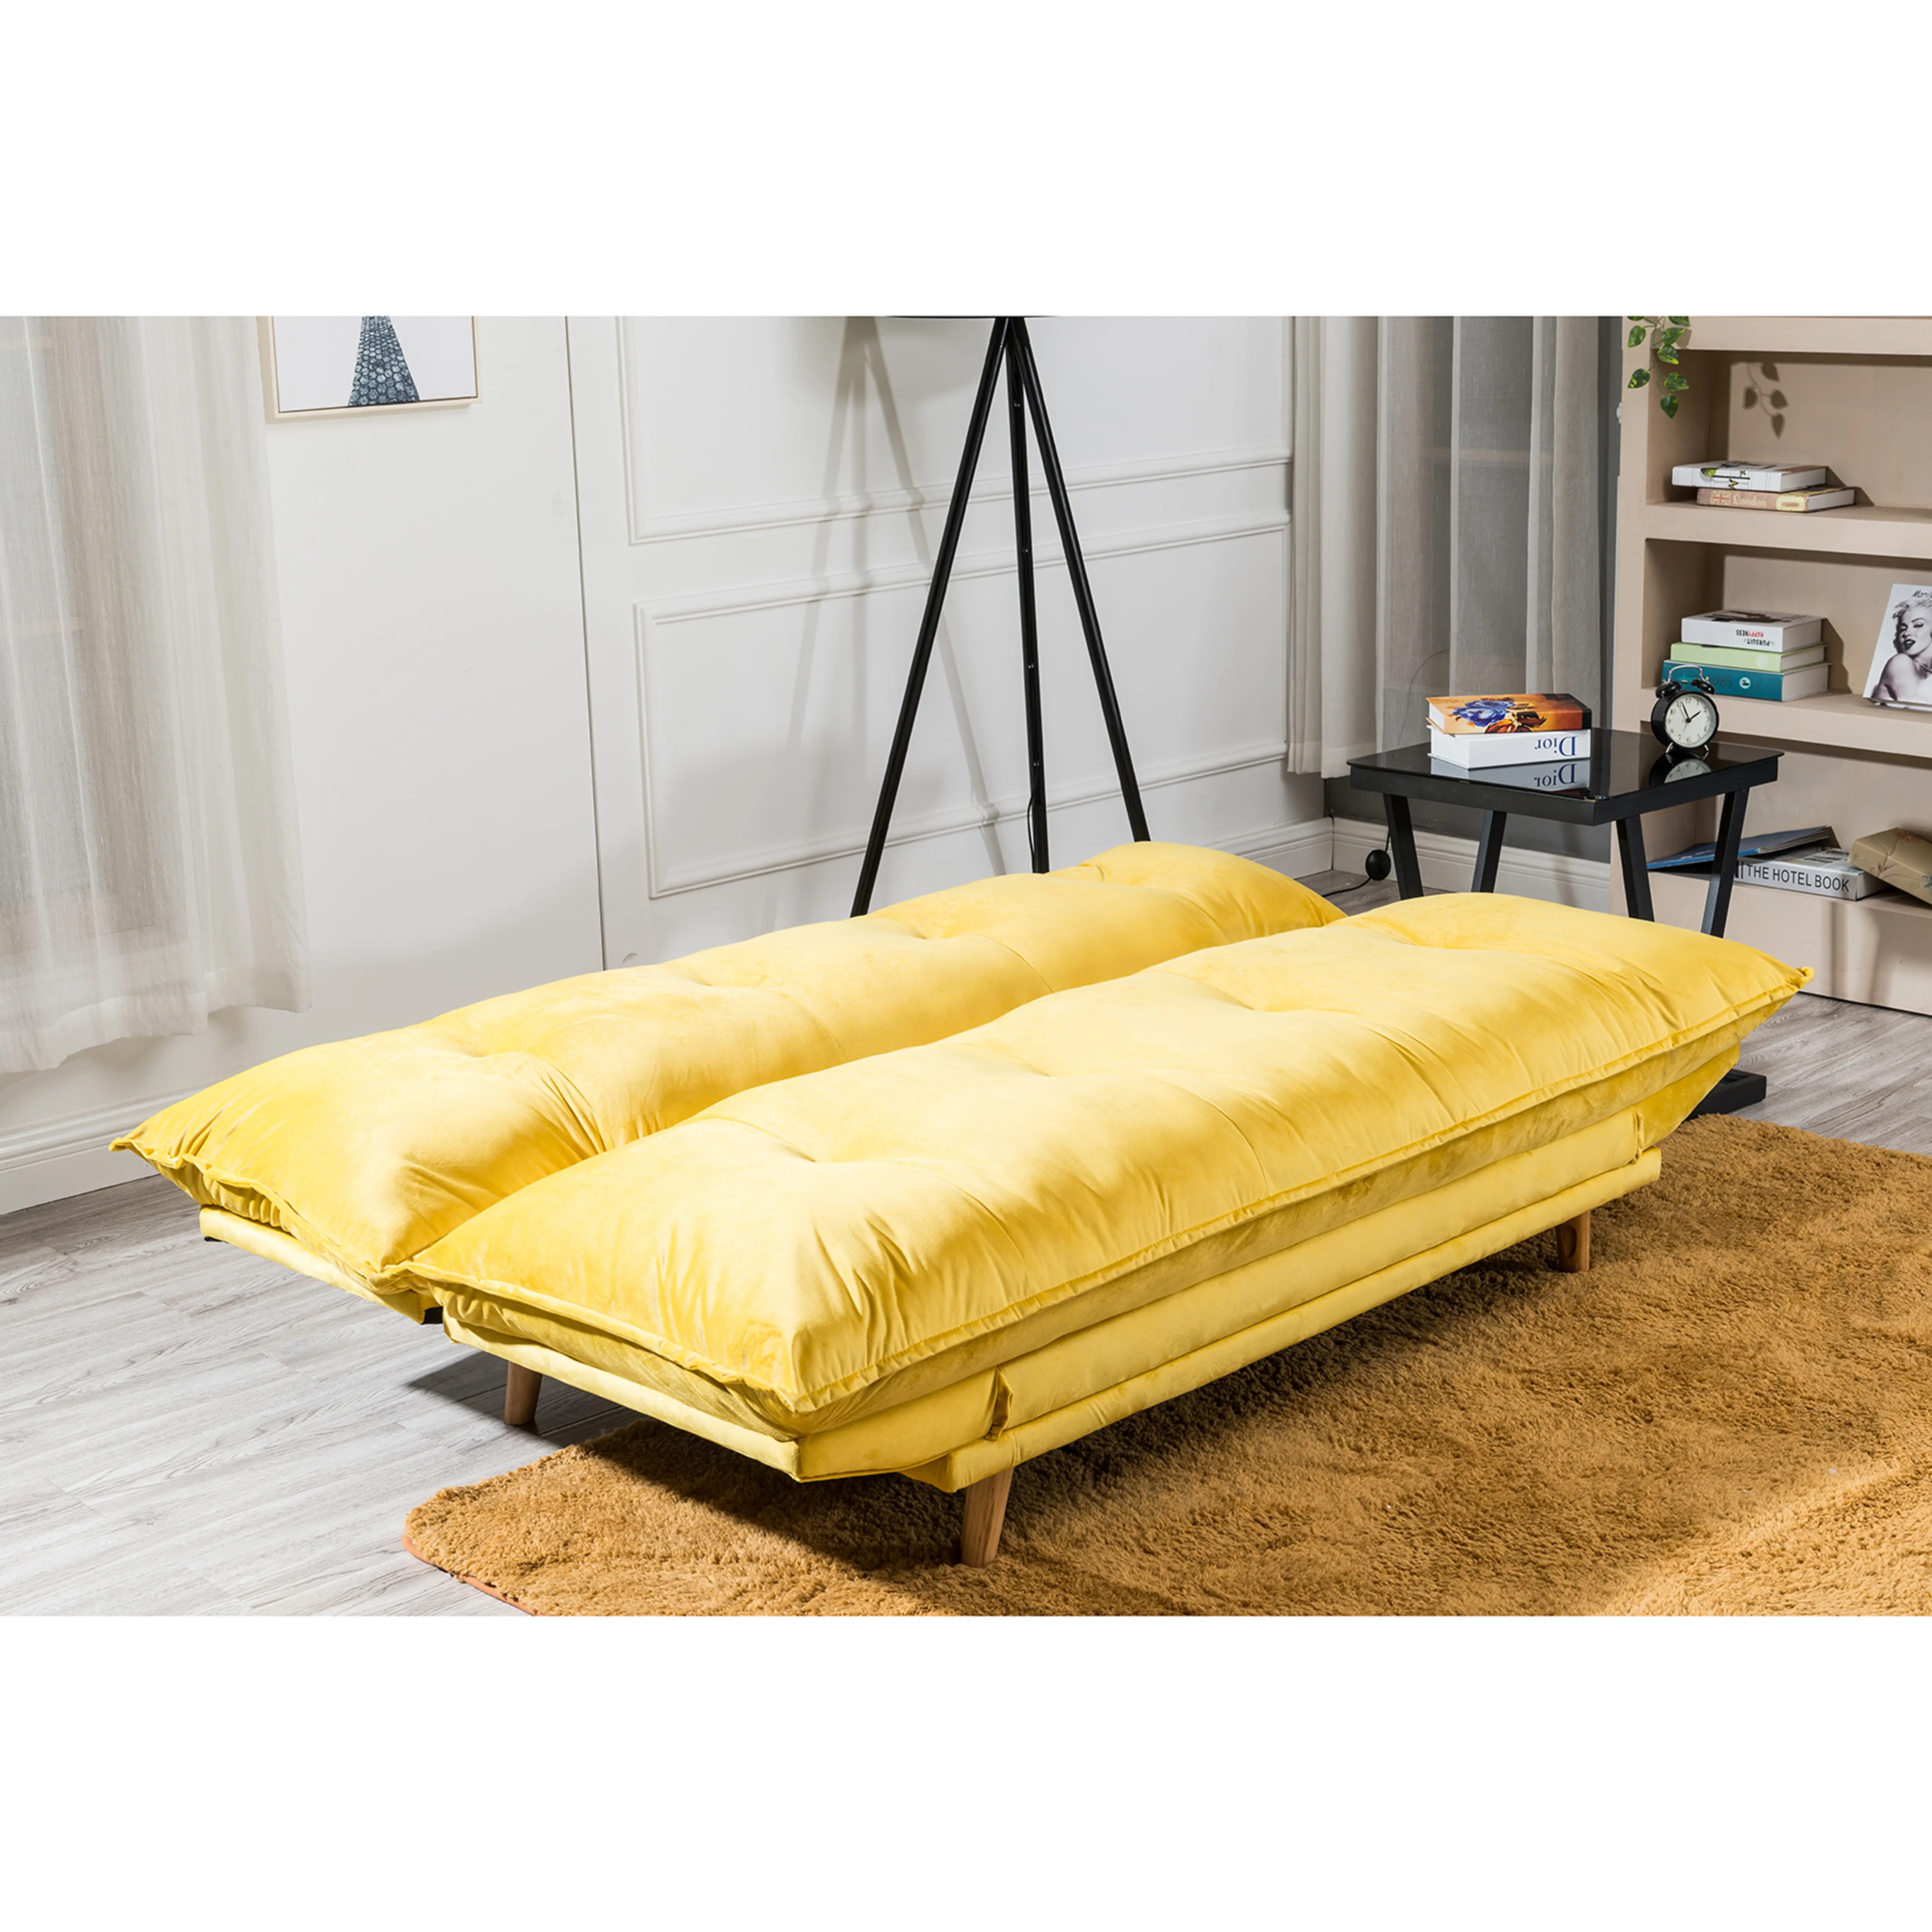 Source New Design Yellow Sofa Bed, Living Room Velvet Sofa Bed, Promotion  Model Good Price Sofa Bed Lounge Sofa on m.alibaba.com